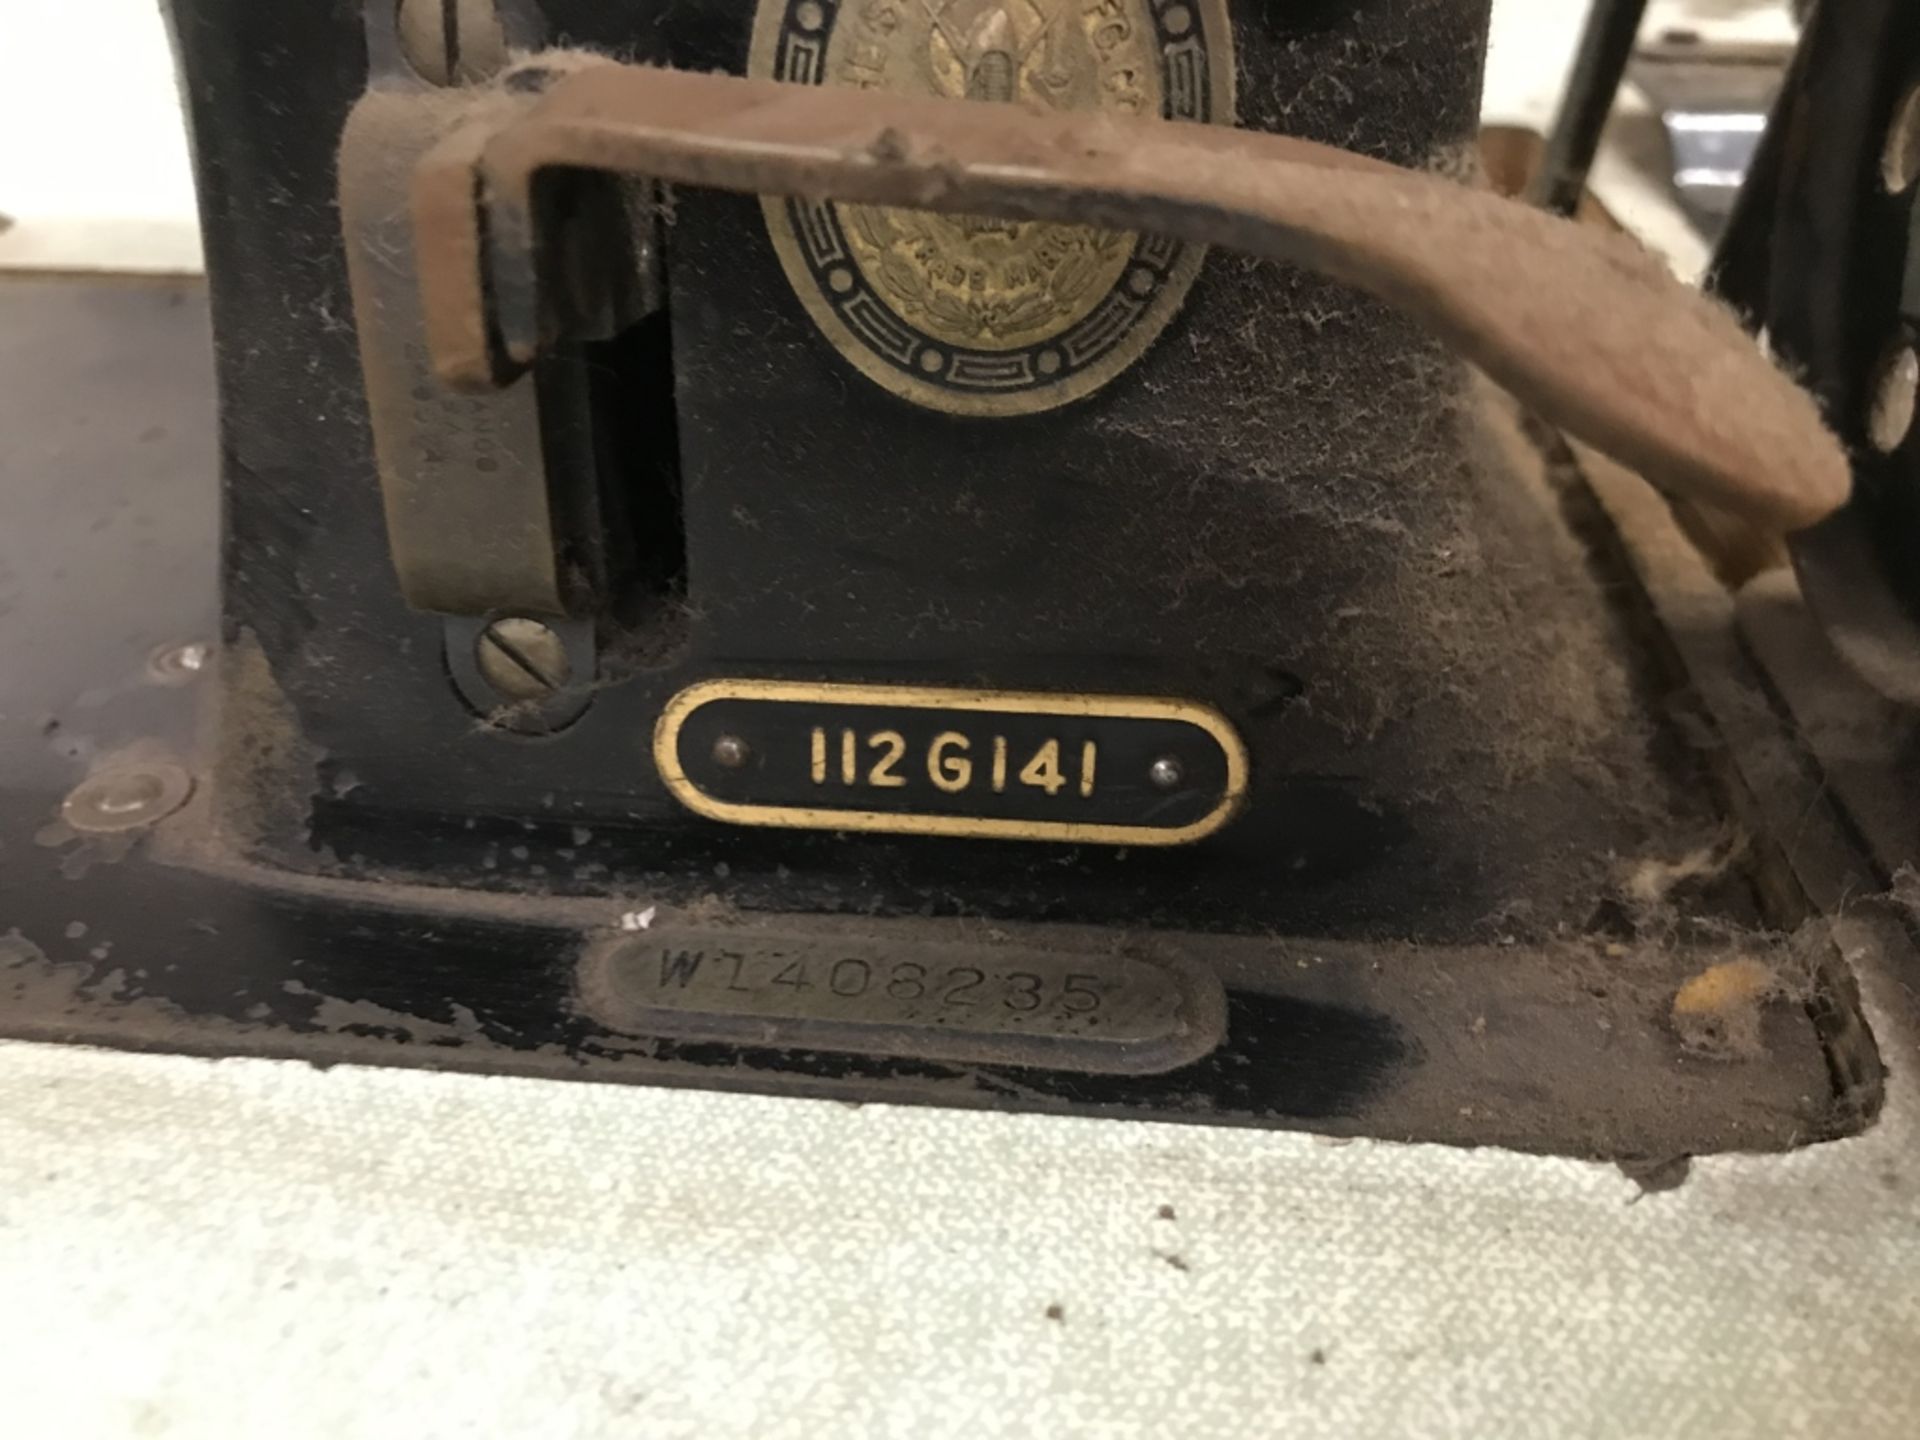 Singer twin needle industrial Sewing Machine - Image 3 of 12